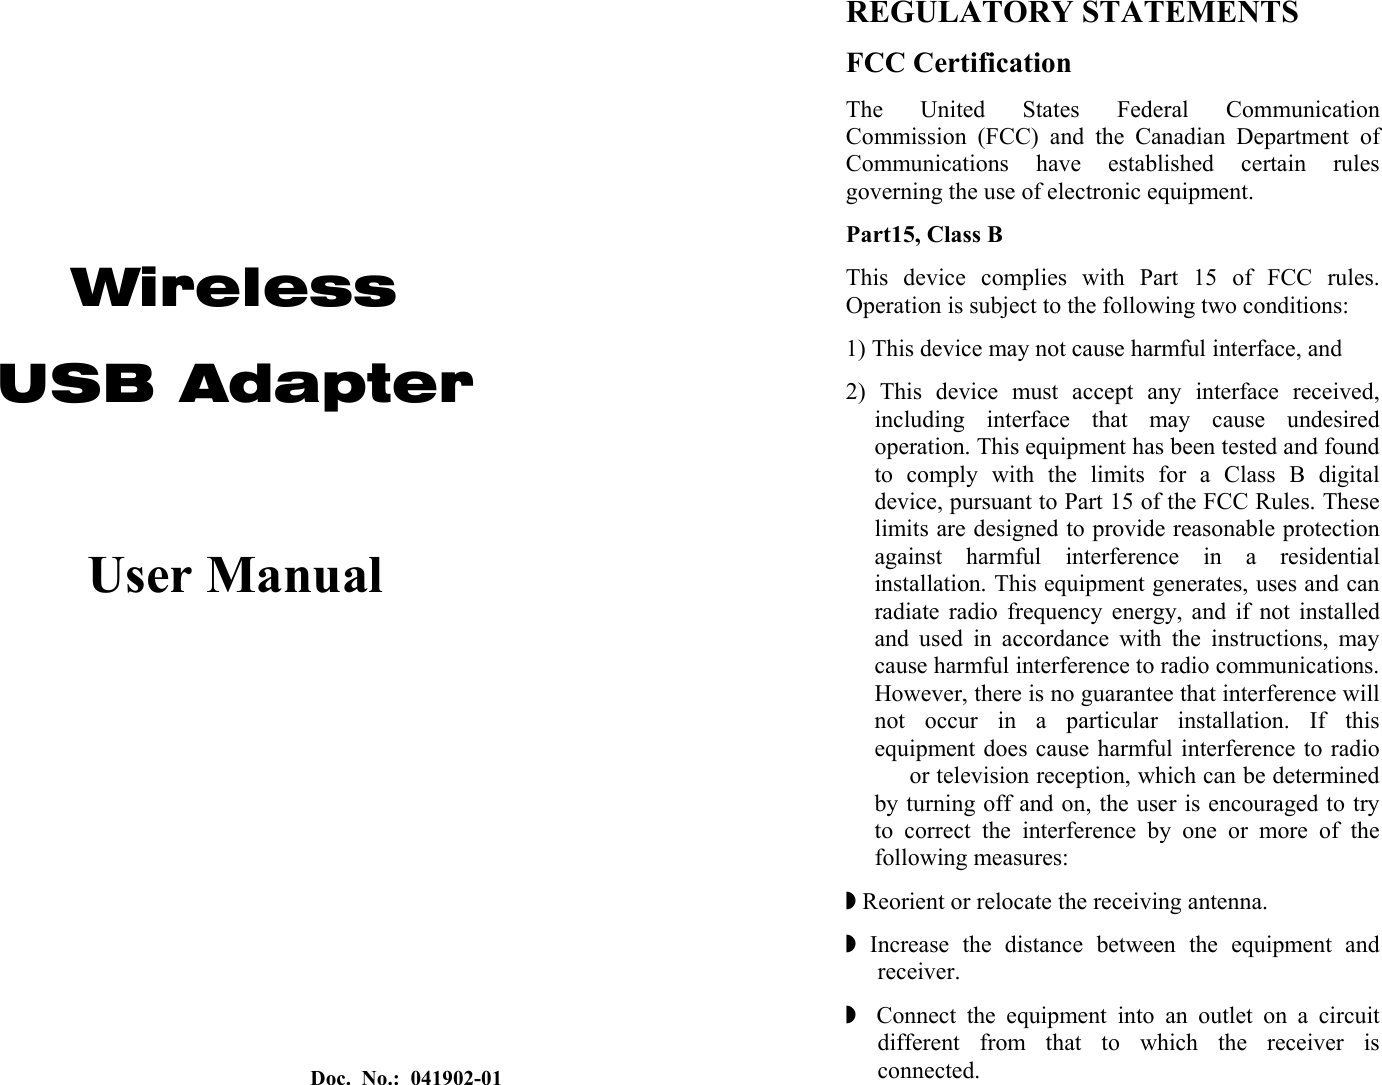 Doc. No.: 041902-01    Wireless  USB Adapter  User Manual  REGULATORY STATEMENTS FCC Certification The United States Federal Communication Commission (FCC) and the Canadian Department of Communications have established certain rules governing the use of electronic equipment. Part15, Class B This device complies with Part 15 of FCC rules. Operation is subject to the following two conditions: 1) This device may not cause harmful interface, and 2) This device must accept any interface received, including interface that may cause undesired operation. This equipment has been tested and found to comply with the limits for a Class B digital device, pursuant to Part 15 of the FCC Rules. These limits are designed to provide reasonable protection against harmful interference in a residential installation. This equipment generates, uses and can radiate radio frequency energy, and if not installed and used in accordance with the instructions, may cause harmful interference to radio communications. However, there is no guarantee that interference will not occur in a particular installation. If this equipment does cause harmful interference to radio   or television reception, which can be determined by turning off and on, the user is encouraged to try to correct the interference by one or more of the following measures: Z Reorient or relocate the receiving antenna. Z Increase the distance between the equipment and receiver. Z  Connect the equipment into an outlet on a circuit different from that to which the receiver is connected. 